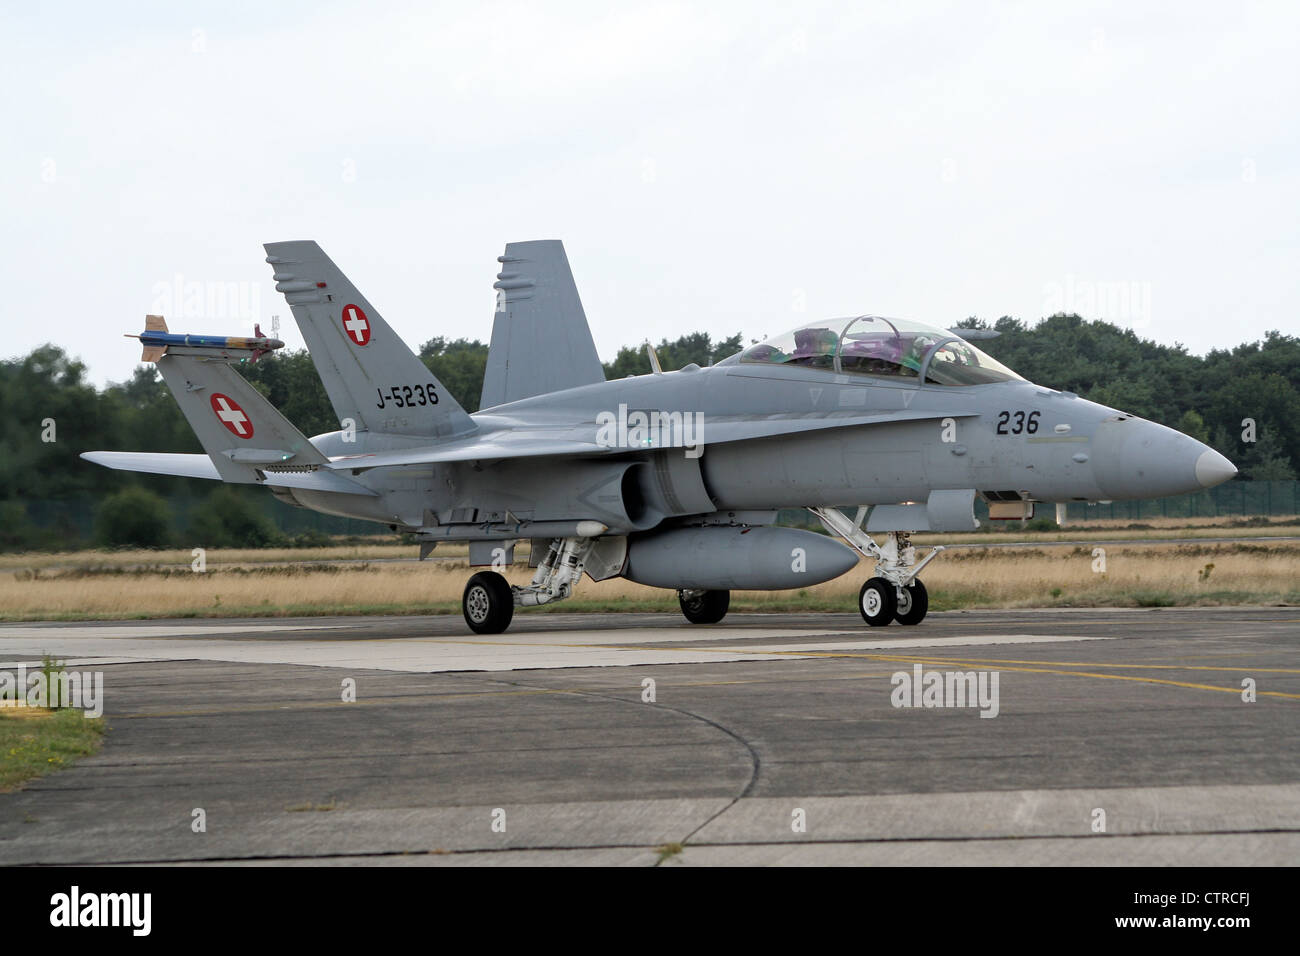 Swiss Air Force F-18 Hornet fighter jet Stock Photo - Alamy